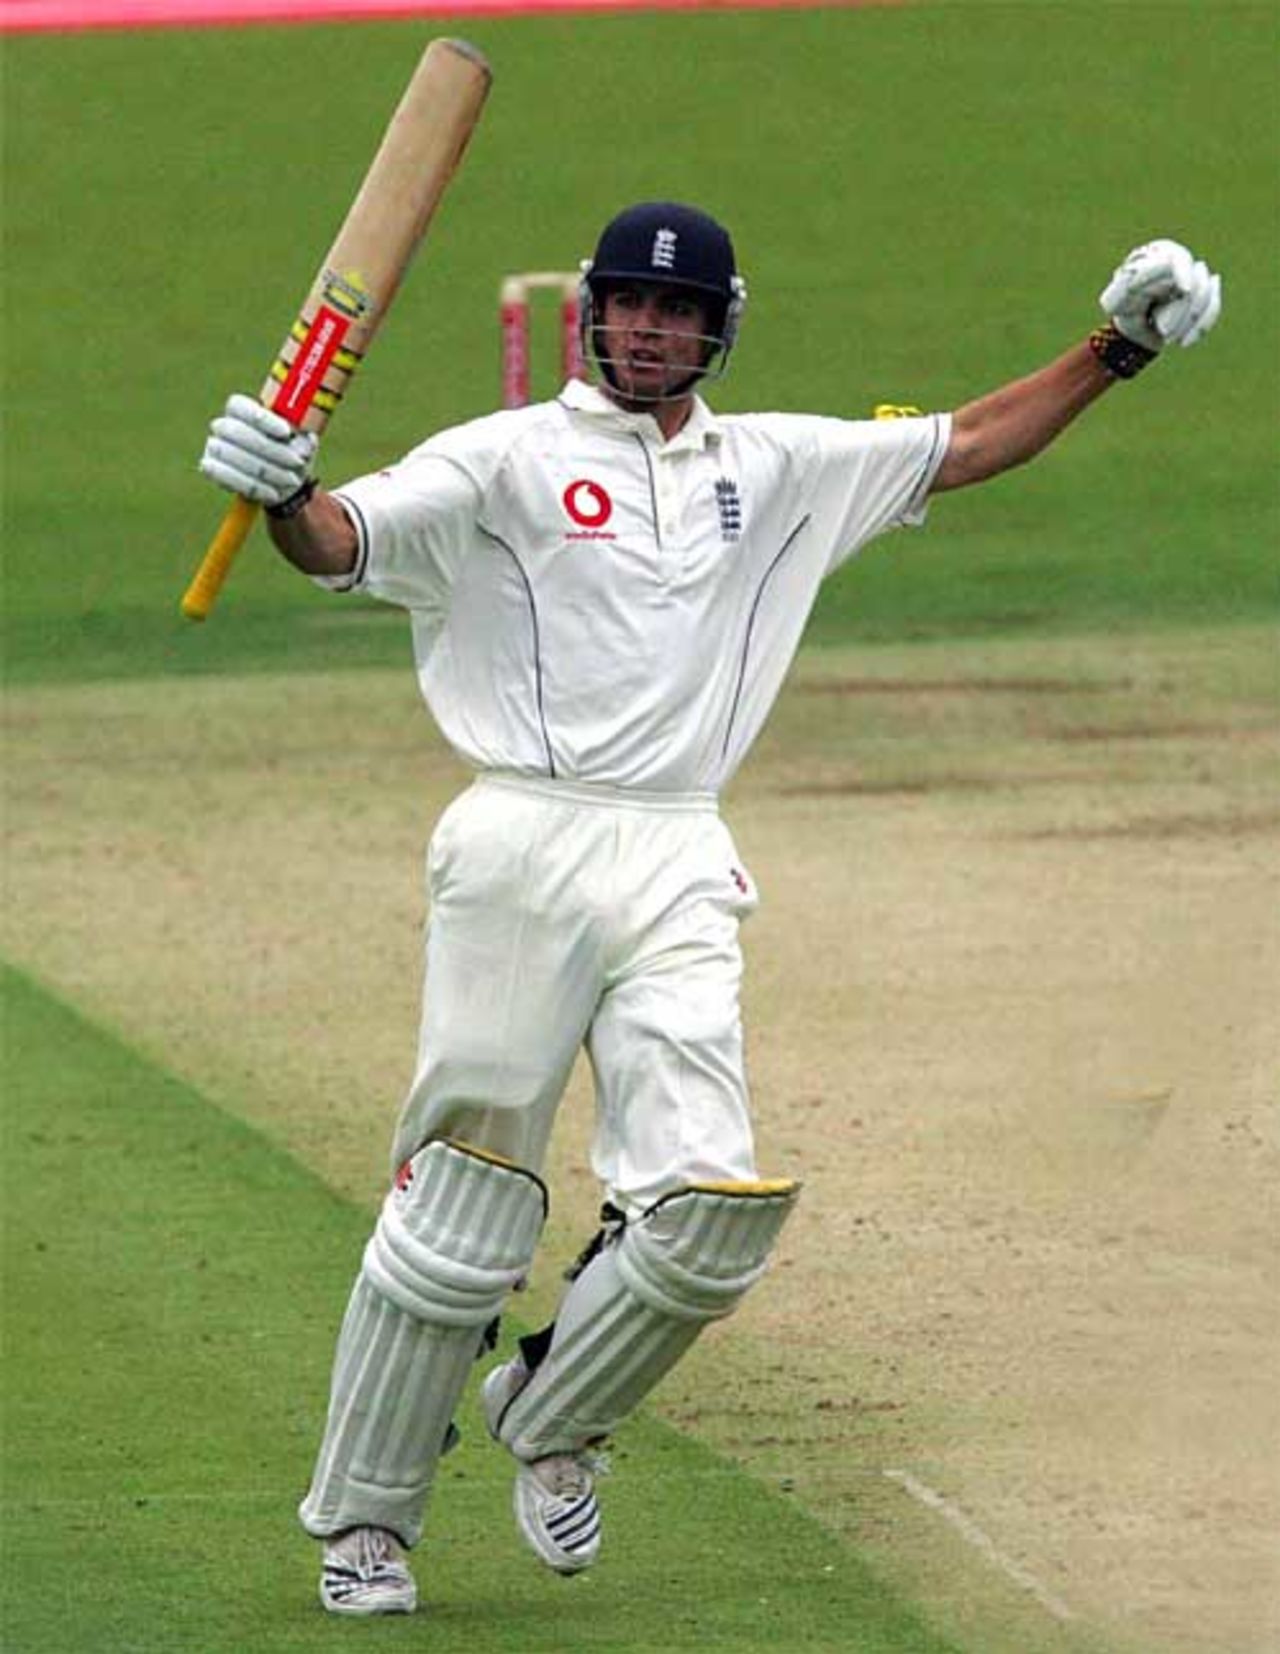 Alastair Cook celebrates his century, England v West Indies, 1st Test, Lord's, May 17, 2007